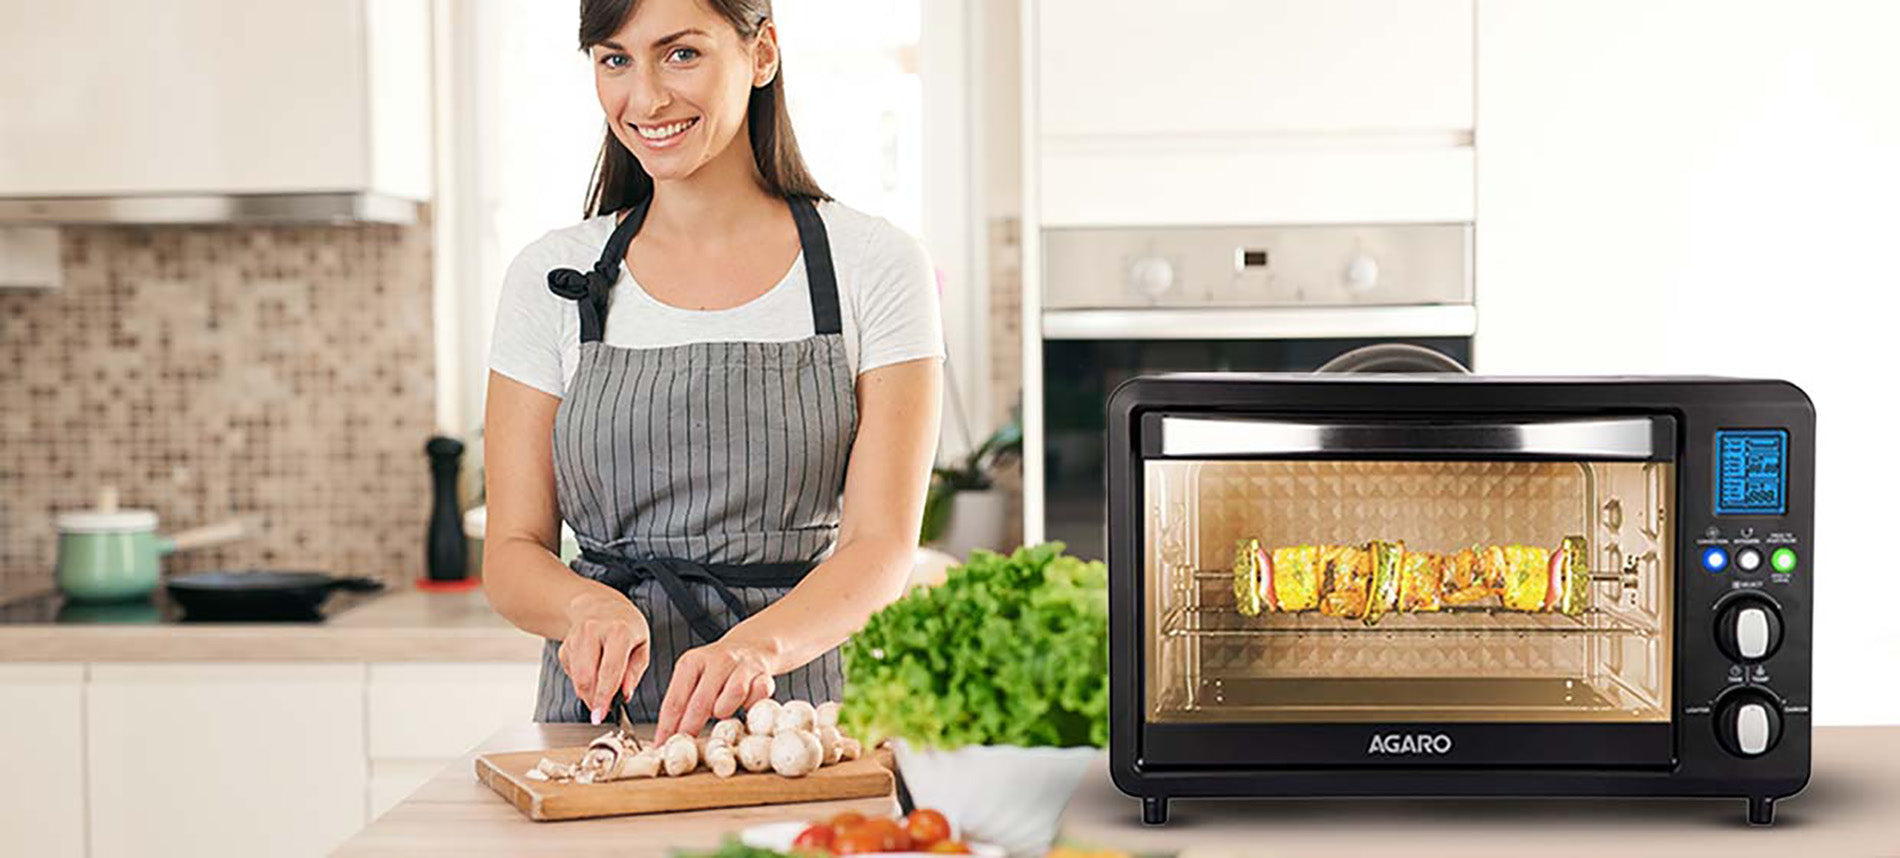 Innovative Oven Toaster Grill Uses for Your Kitchen: A Guide – Agaro